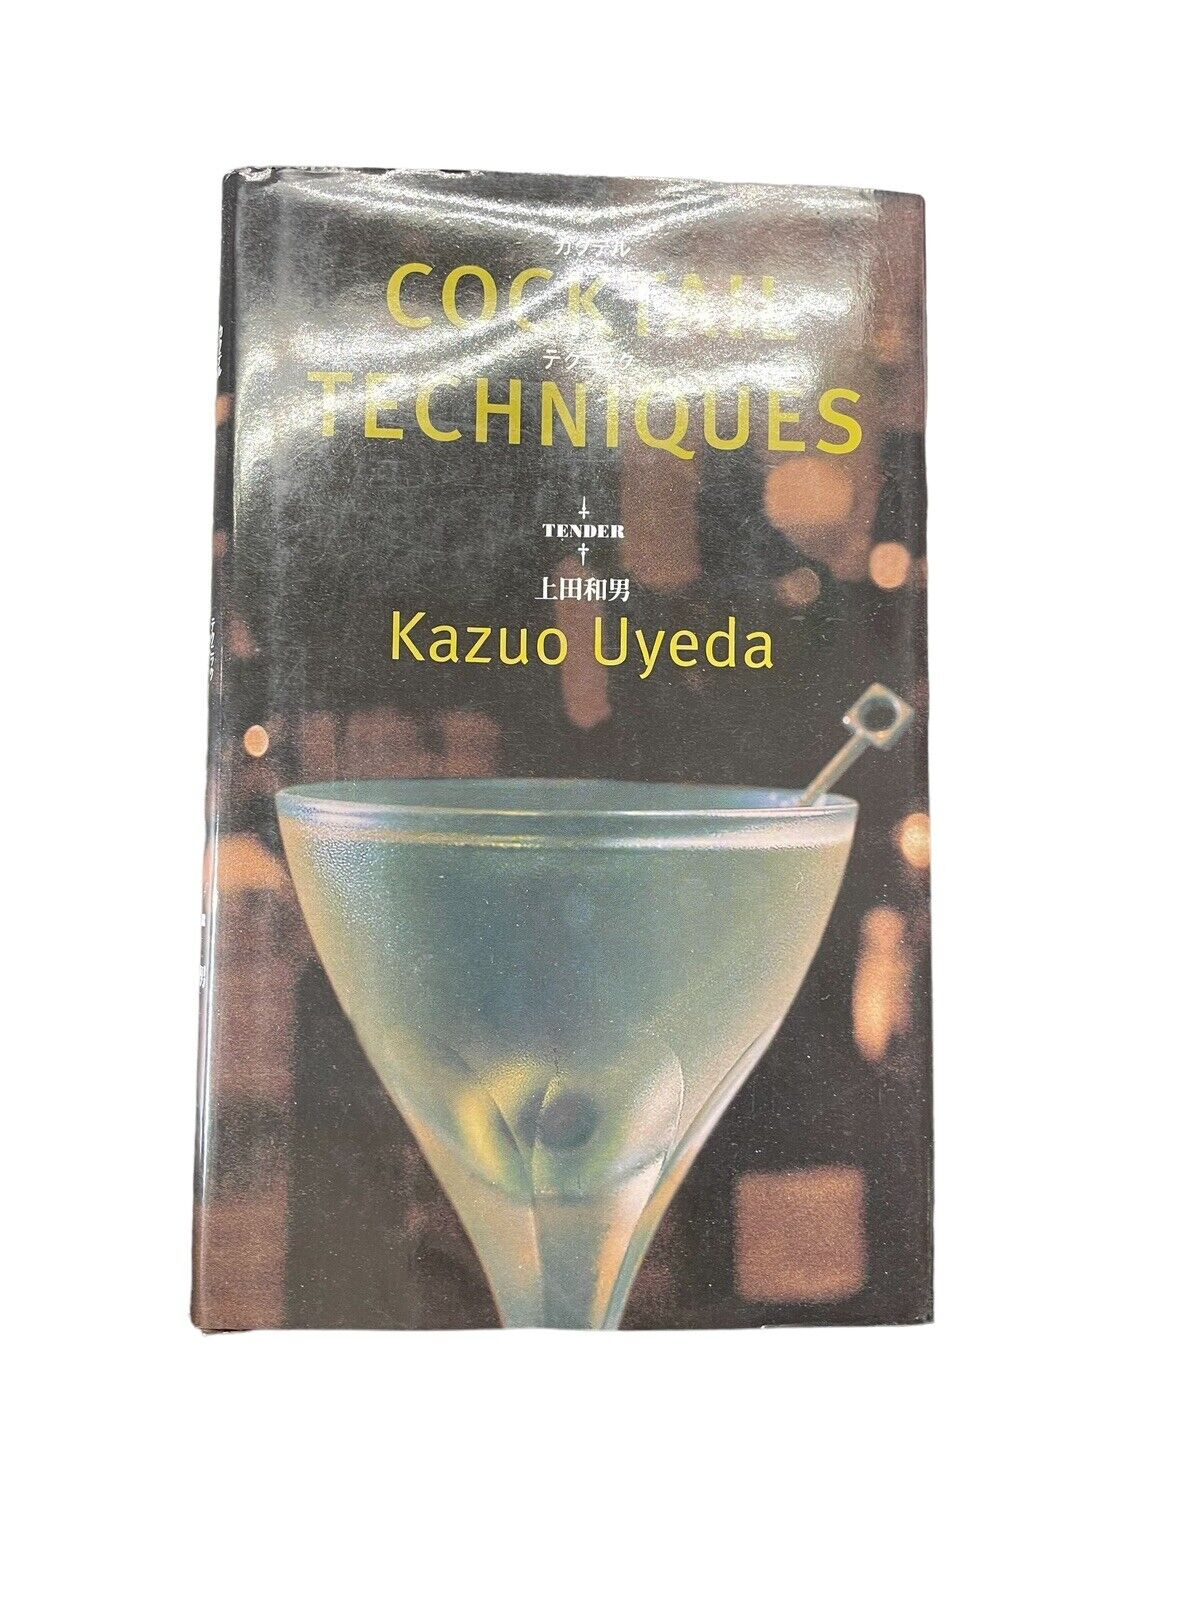 Cocktail Techniques by Kazuo Uyeda. Hardcover. Japanese Bartending.